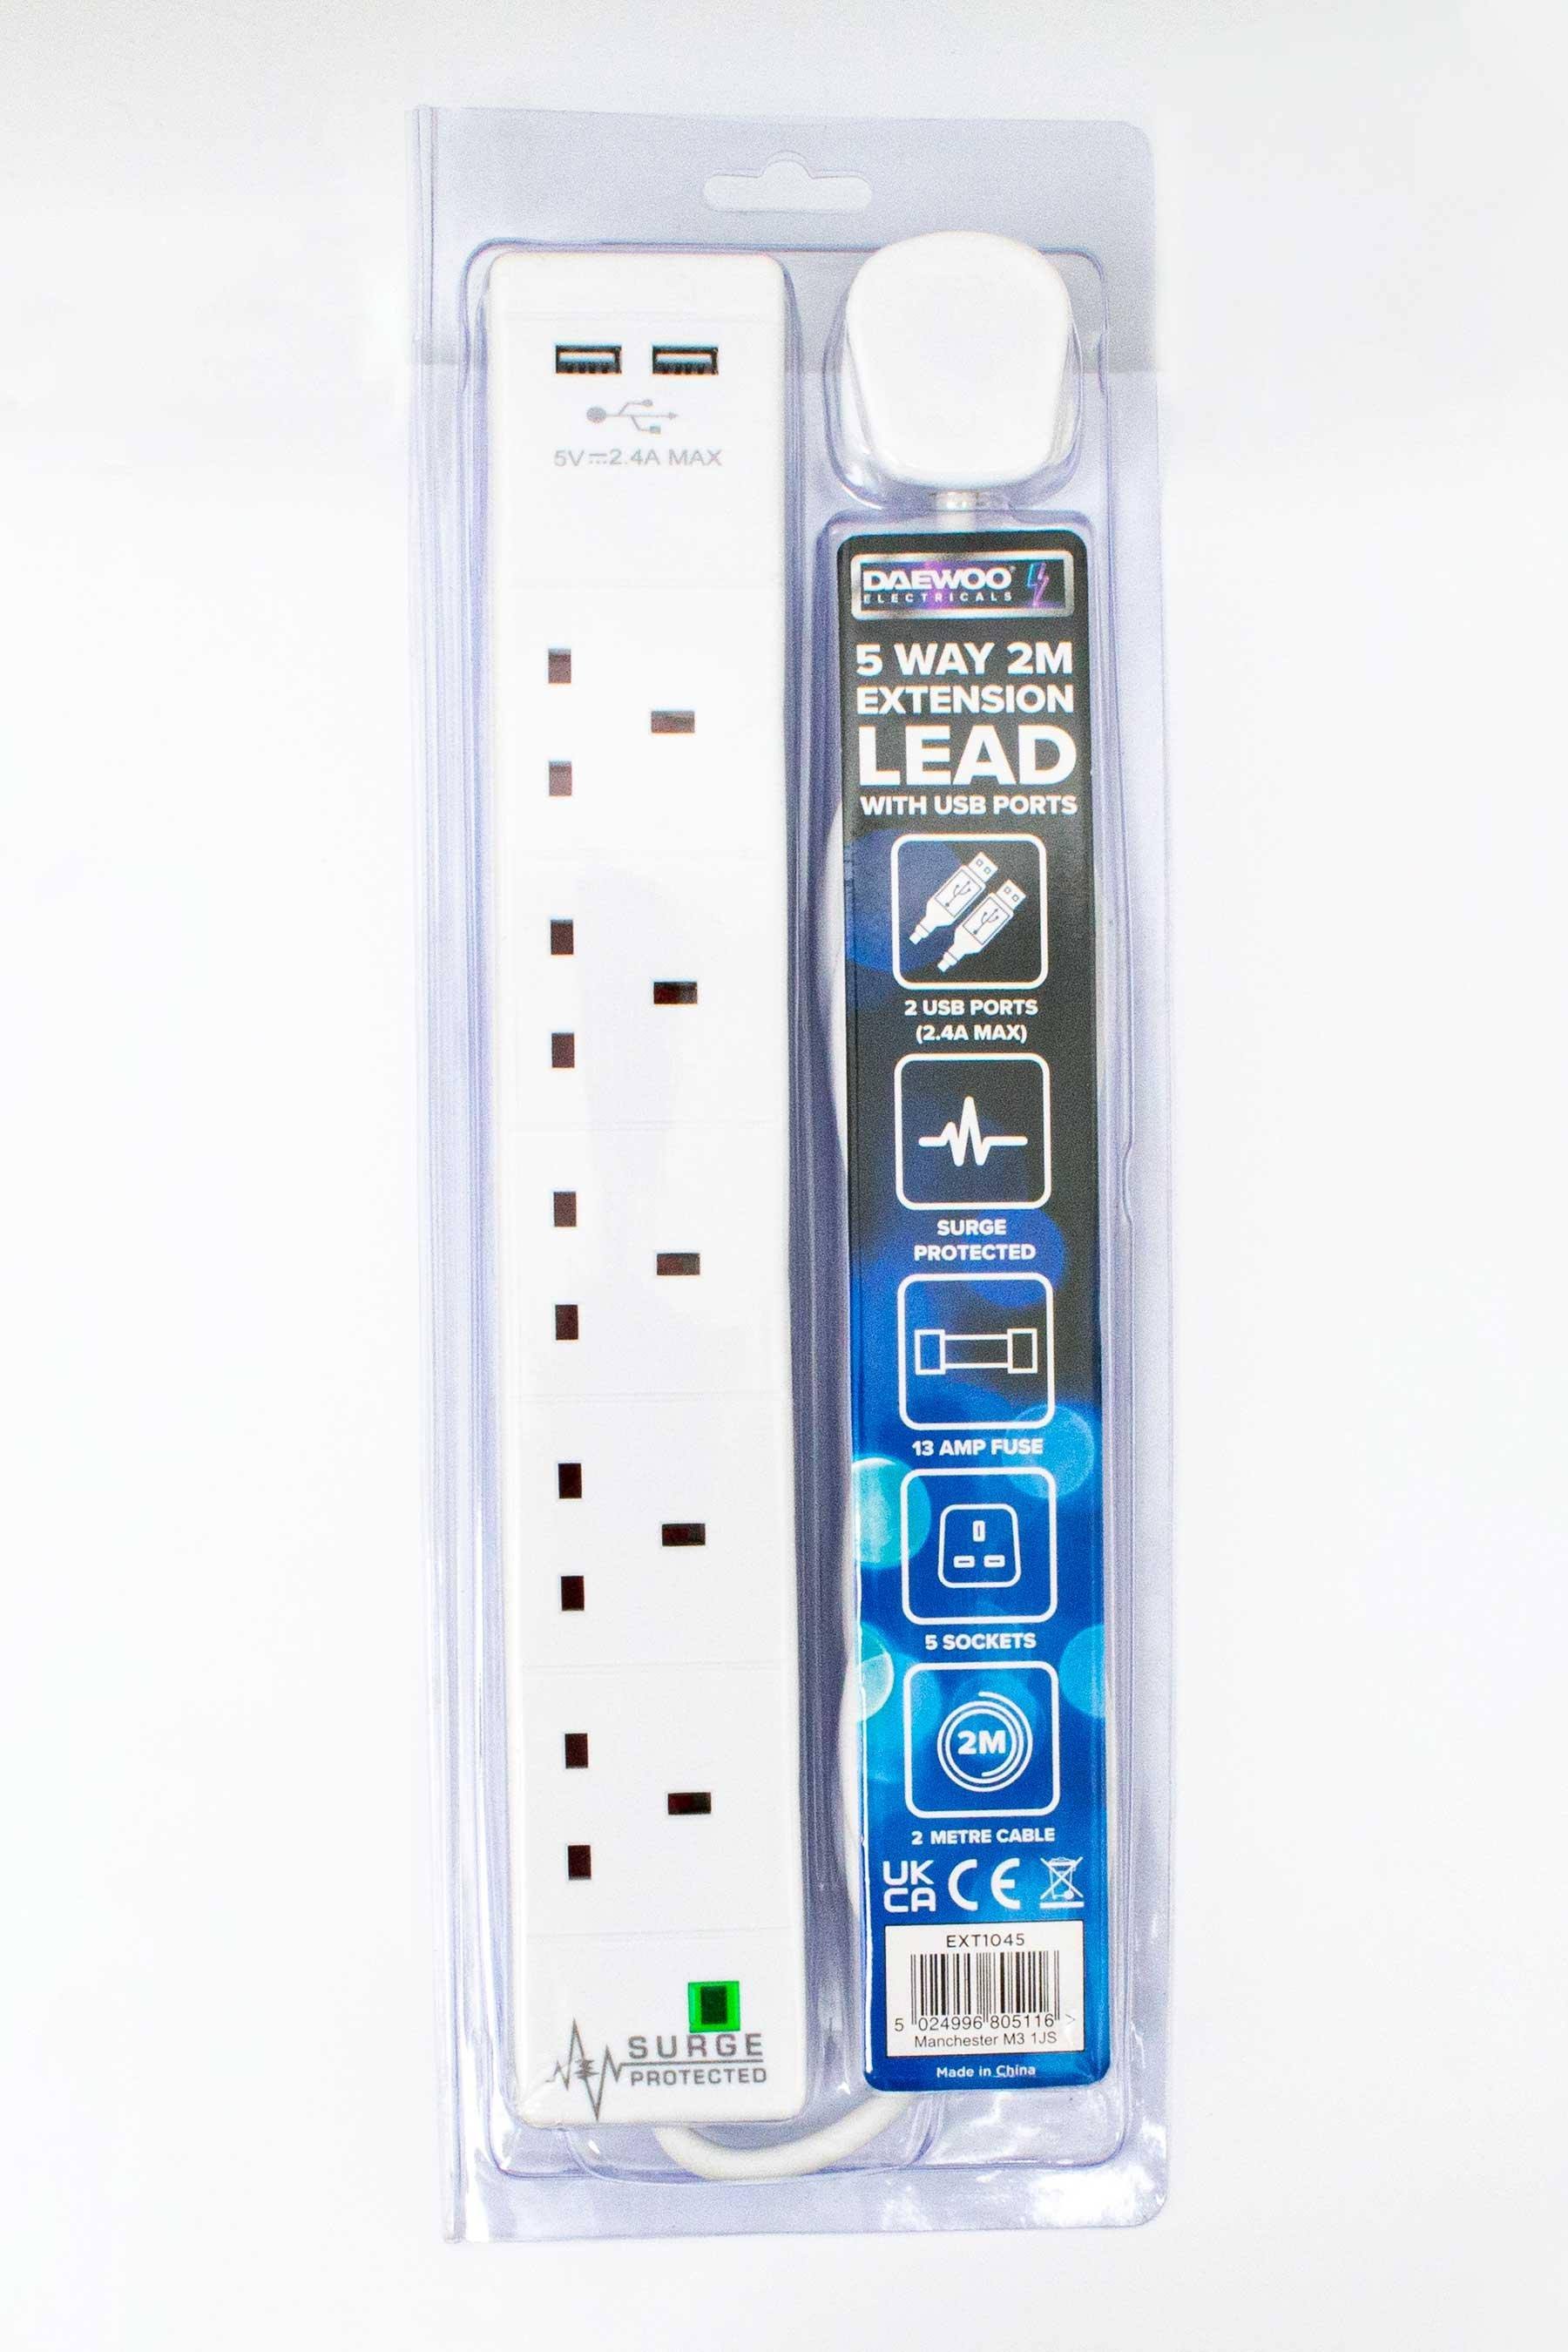 Pifco EXT1045 2m 5 Gang Surge Extension with 2 USB Charger - White